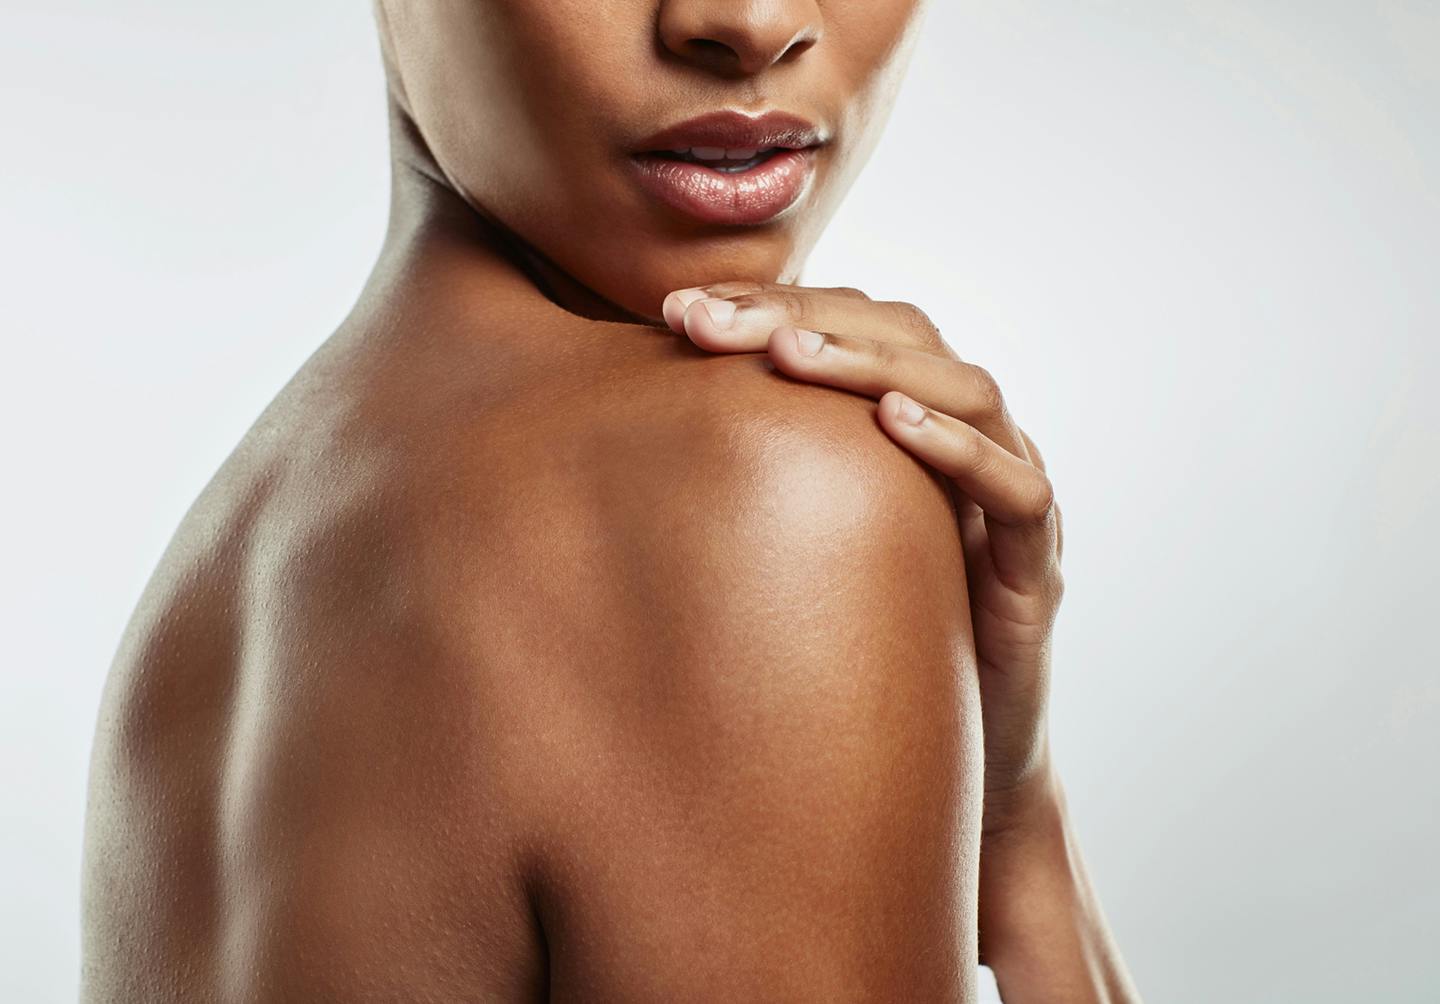 an image of a woman with smooth dark skin looking over her shoulder